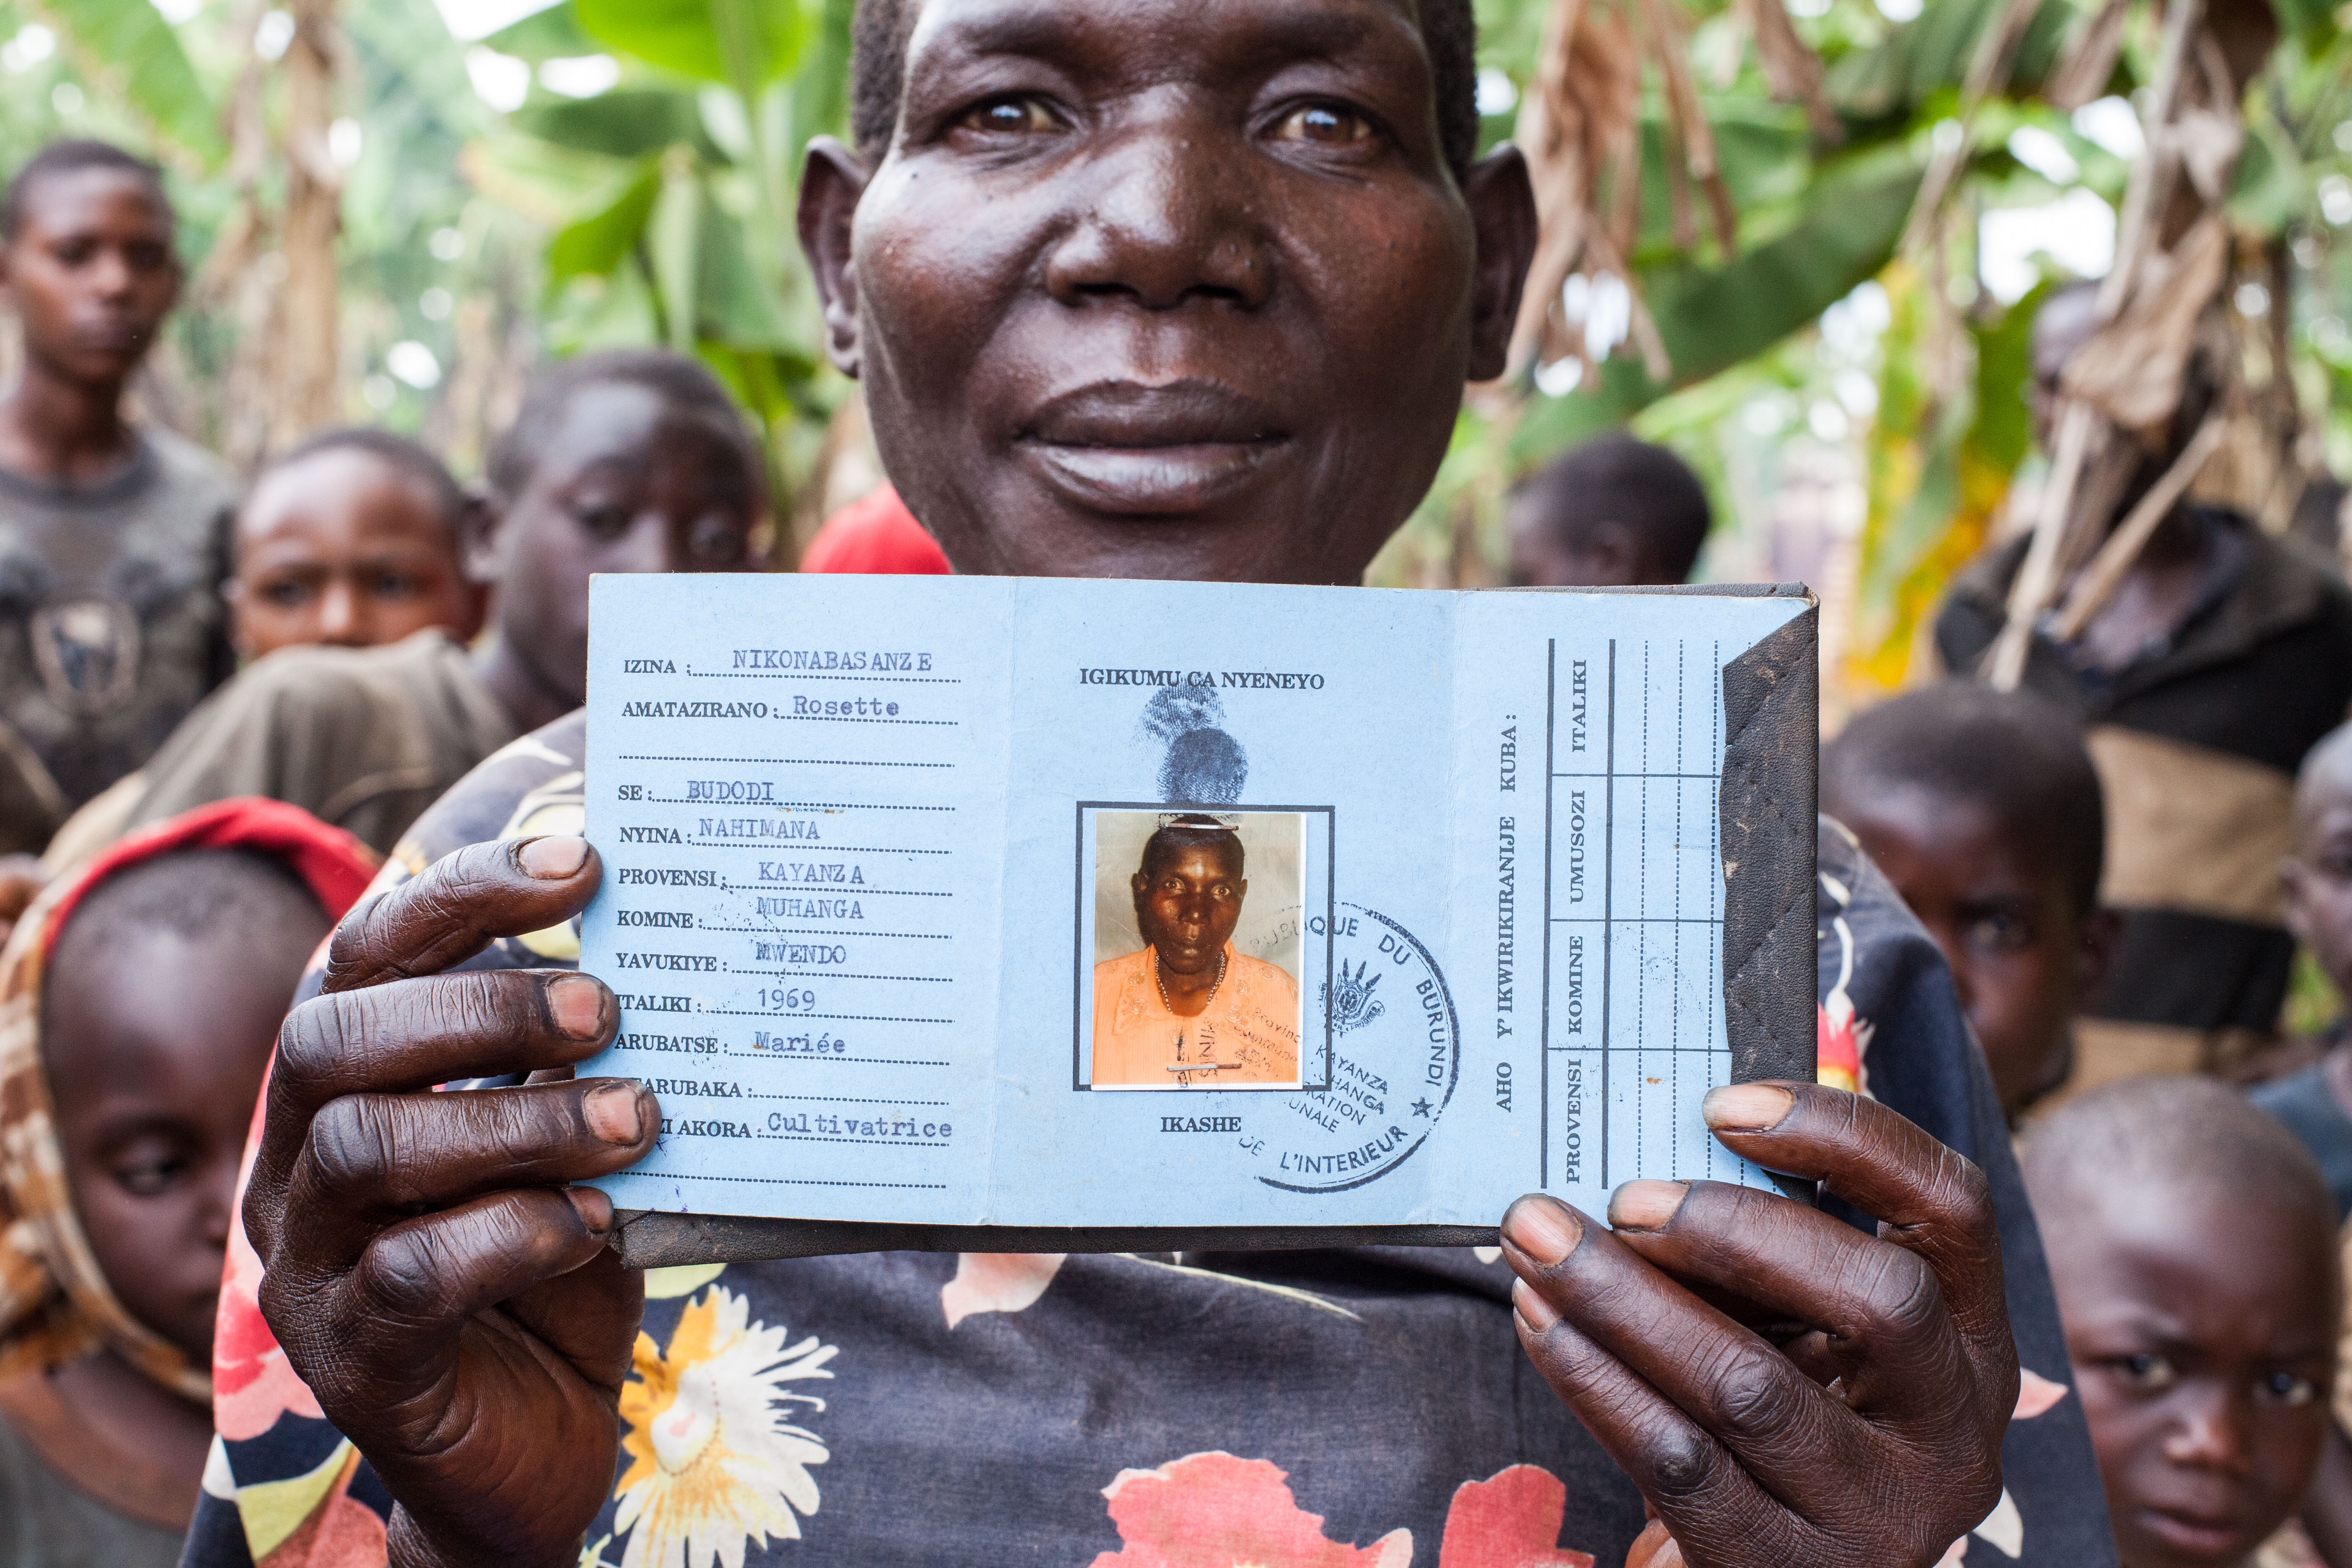 A woman smiling with her identification card